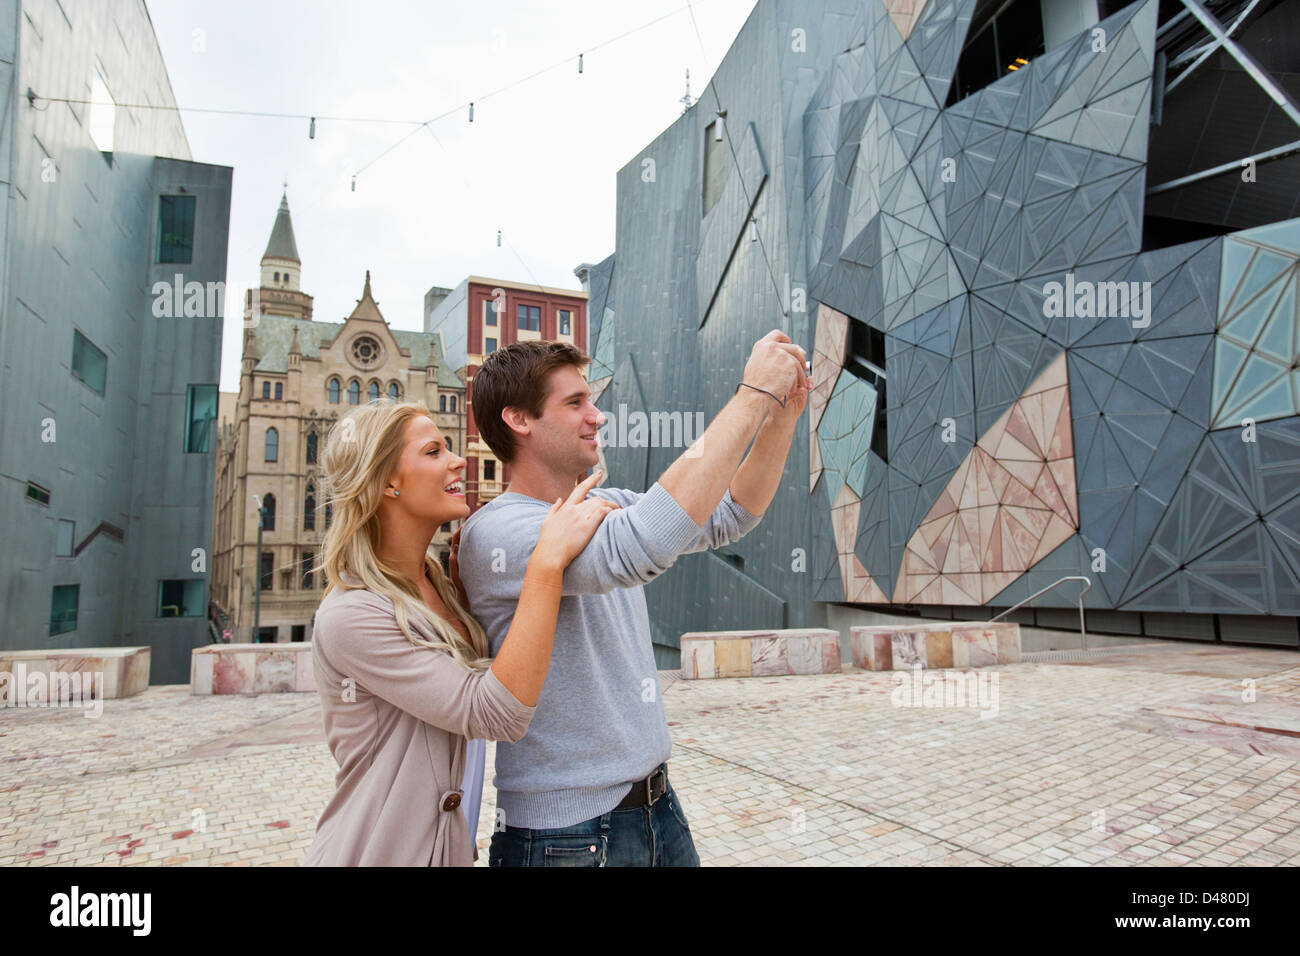 Young couple sightseeing in city, taking a picture. Federation Square, Melbourne, Victoria, Australia Stock Photo